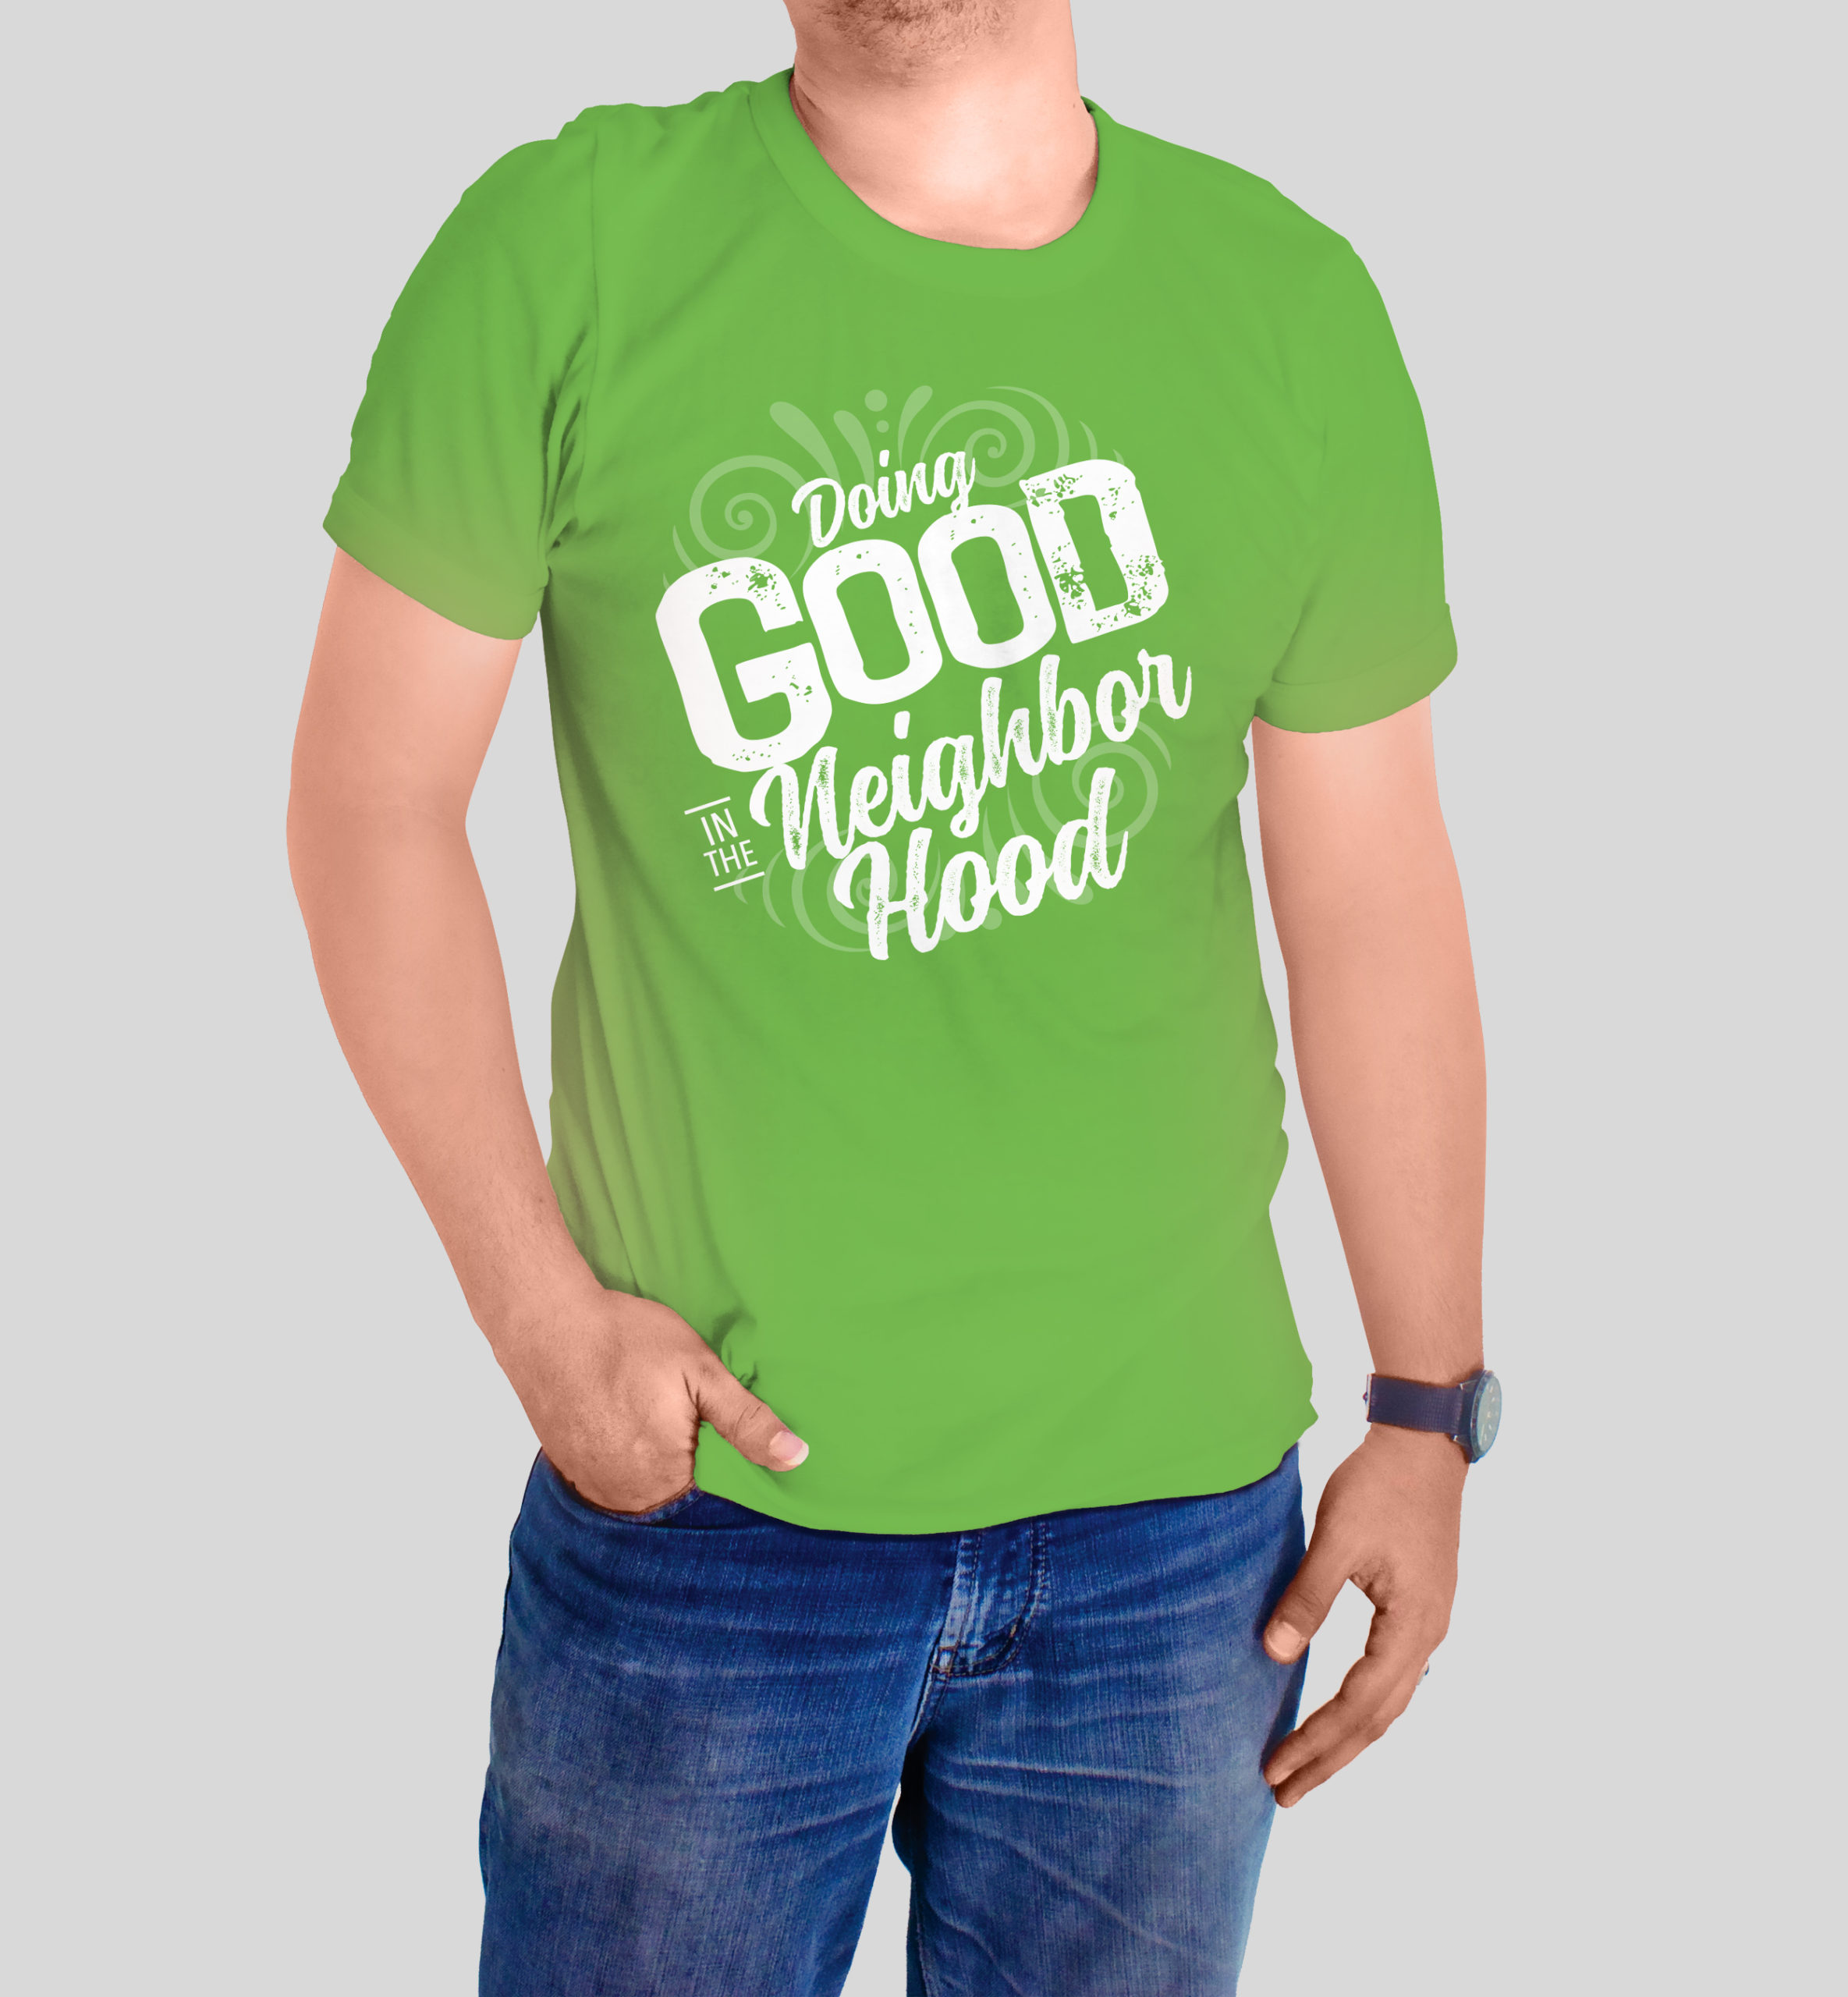 GDGD_FH Tshirt FRONT